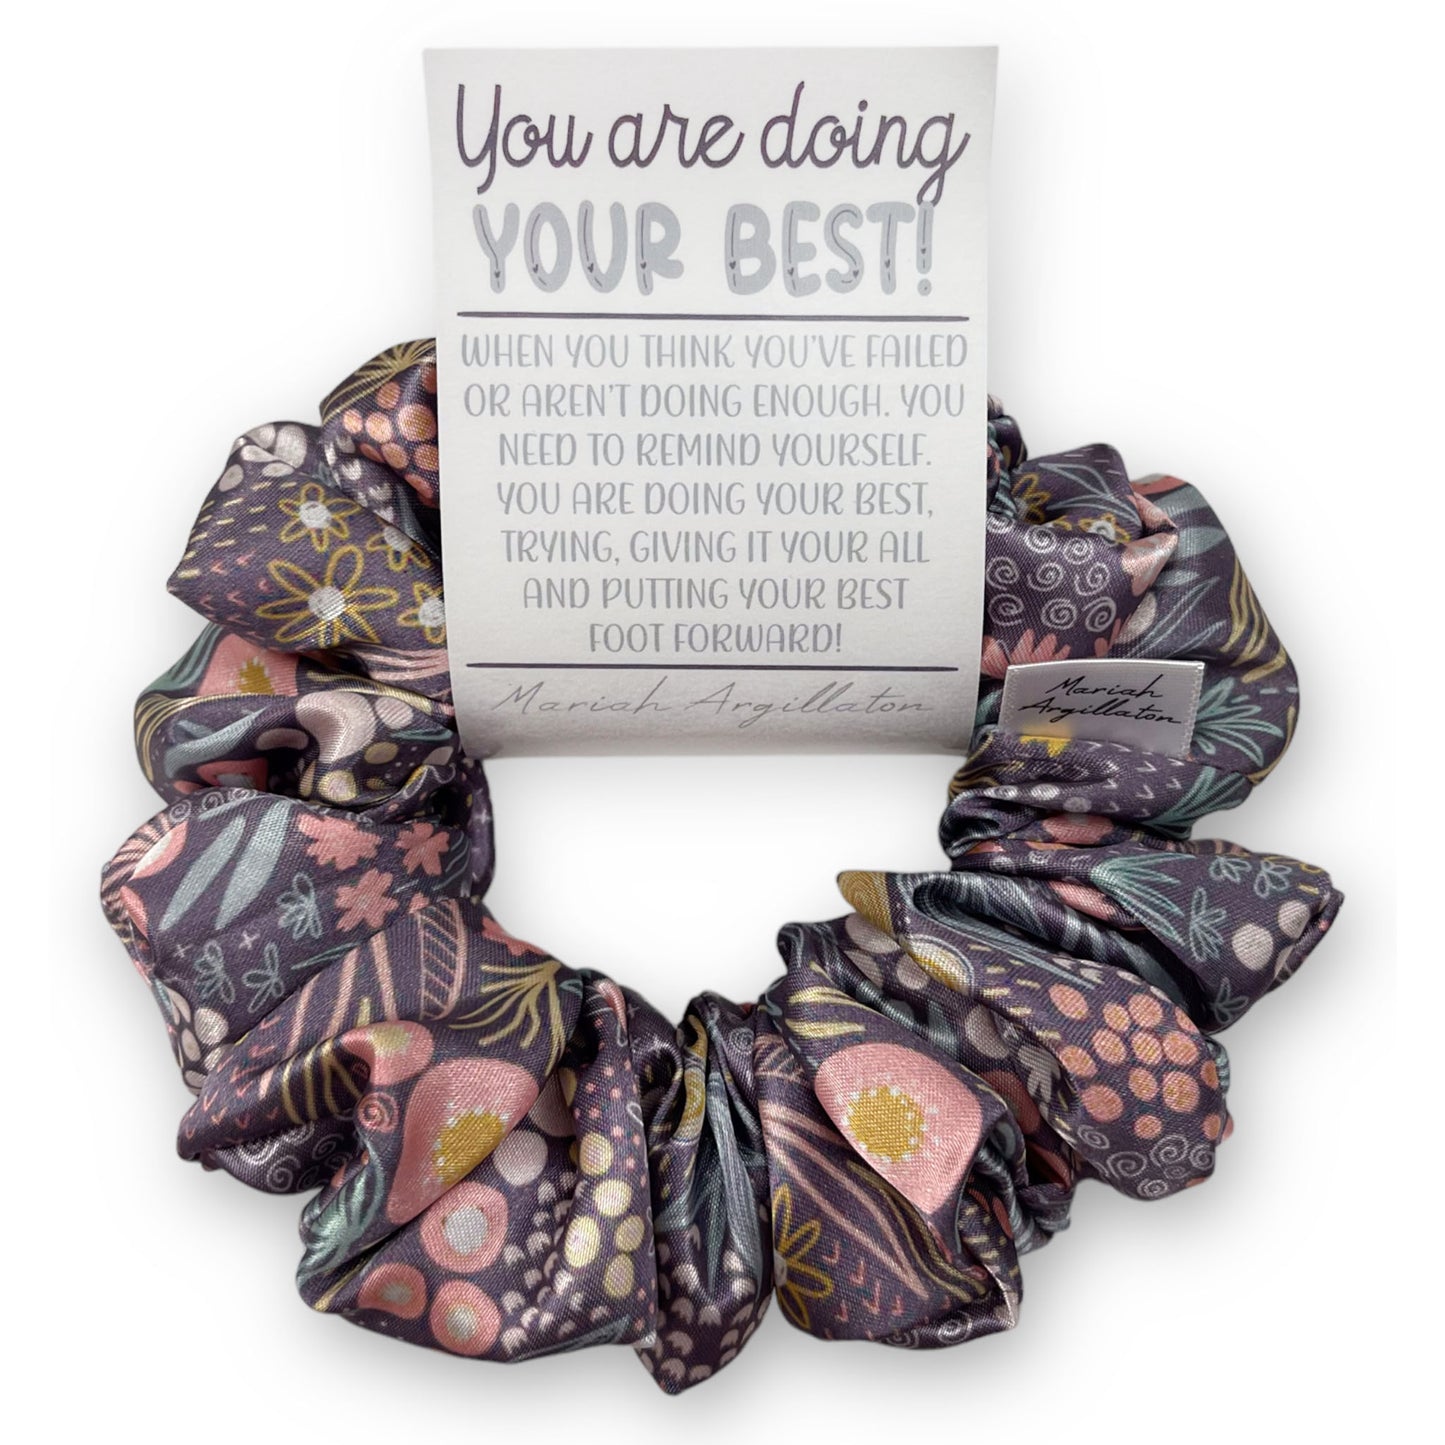 You Are Doing Your Best! Regular Scrunchie!